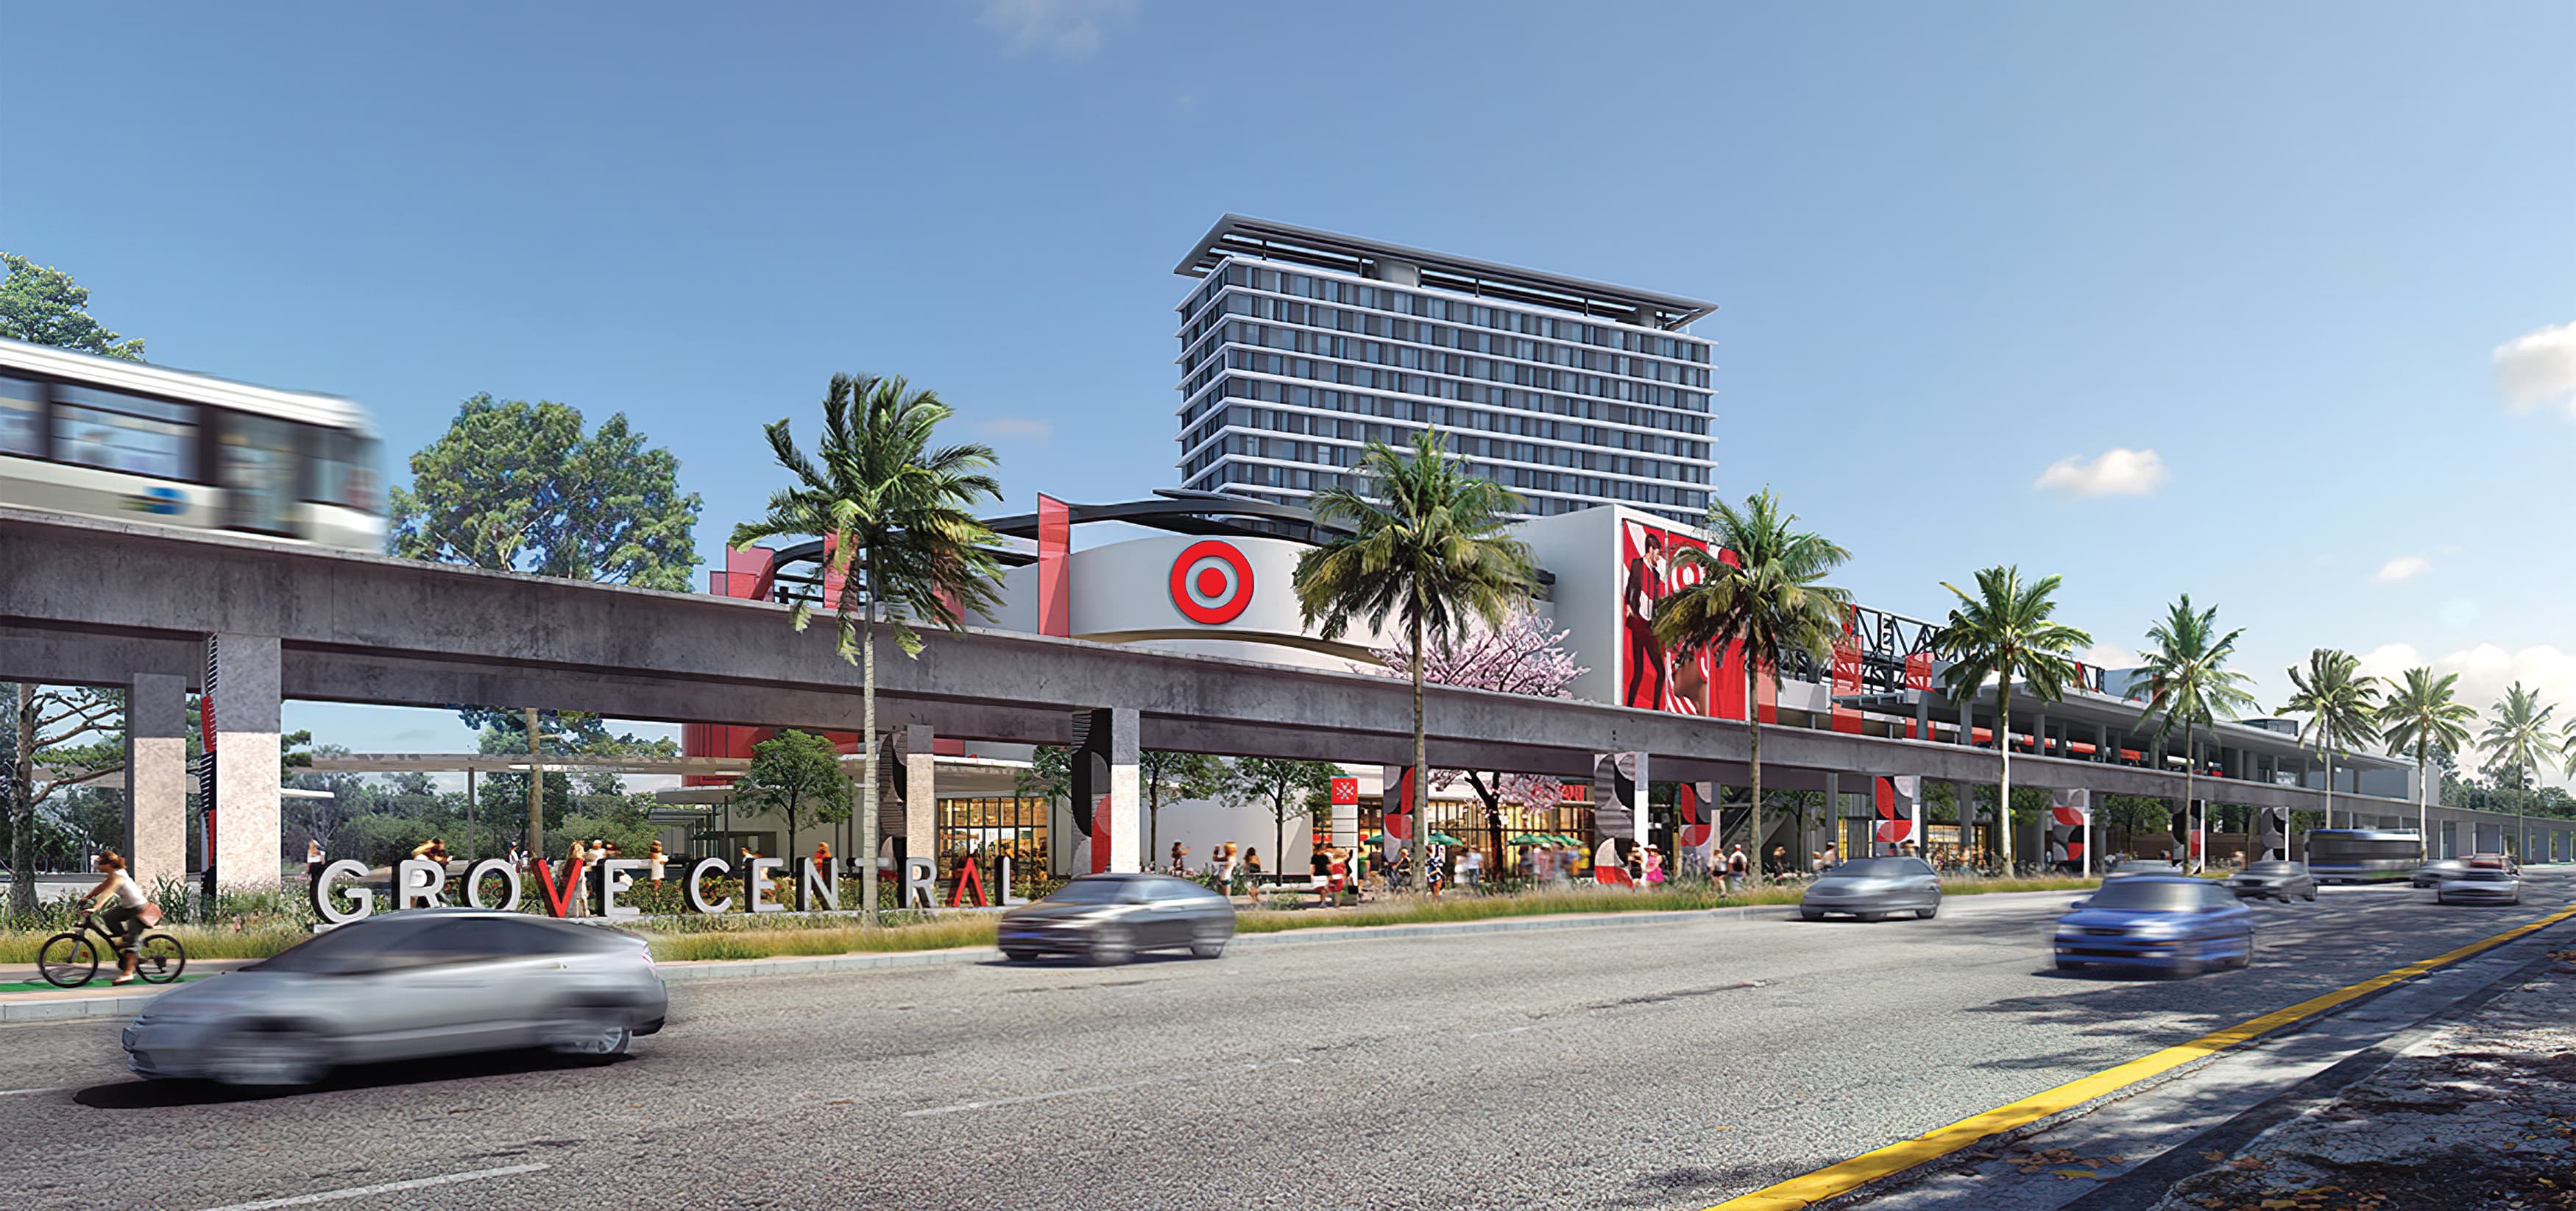 Grove Central, a mixed-use, retail project located in Coconut Grove, Florida. RSM Design. Environmental Graphic Design, Wayfinding Signage, Placemaking, Graphic Architecture.